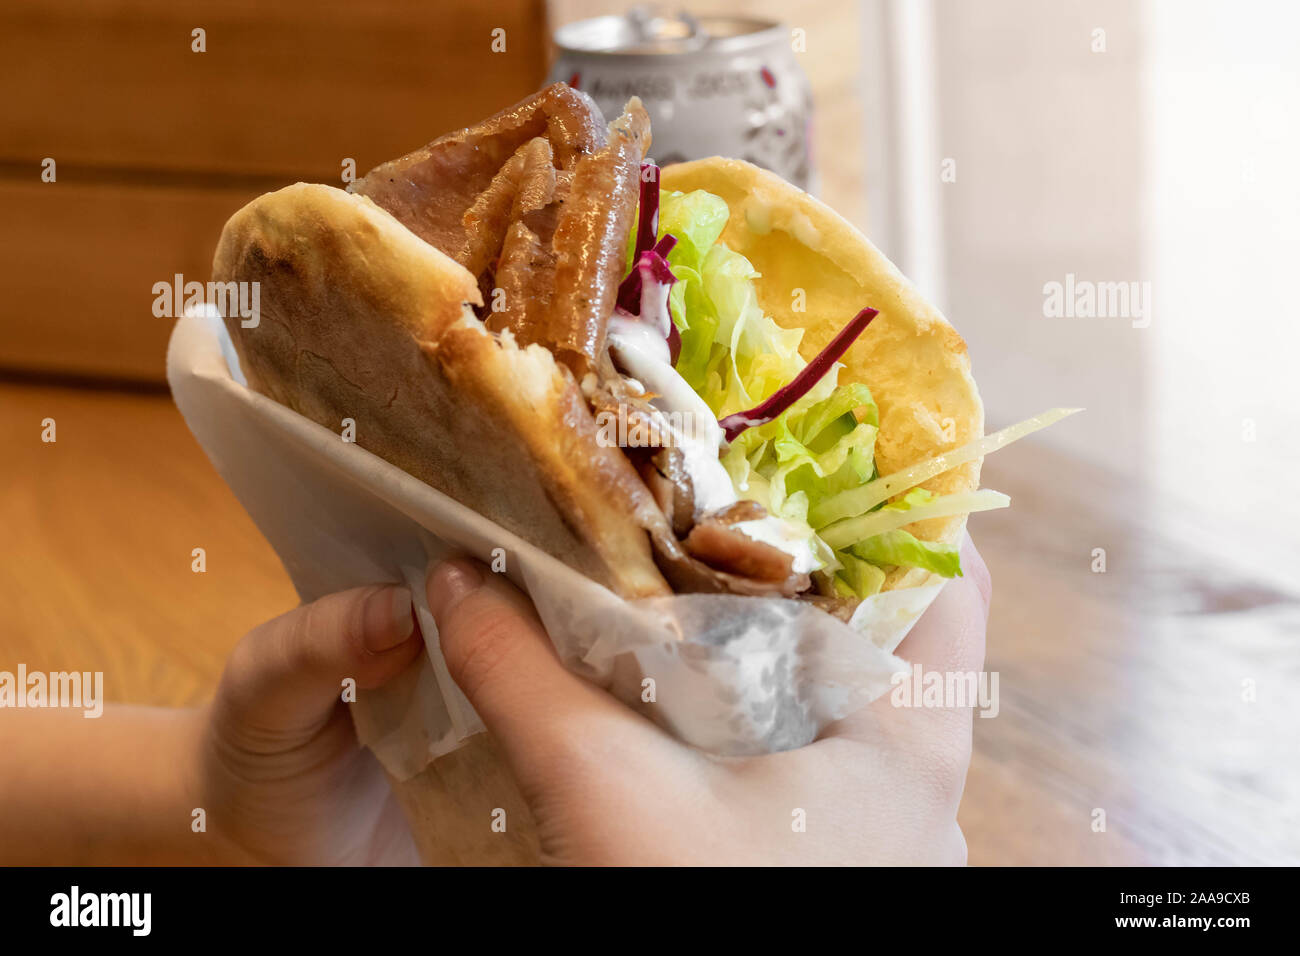 Girl holding a delicious doner in her hands / Girl eating a doner Stock Photo